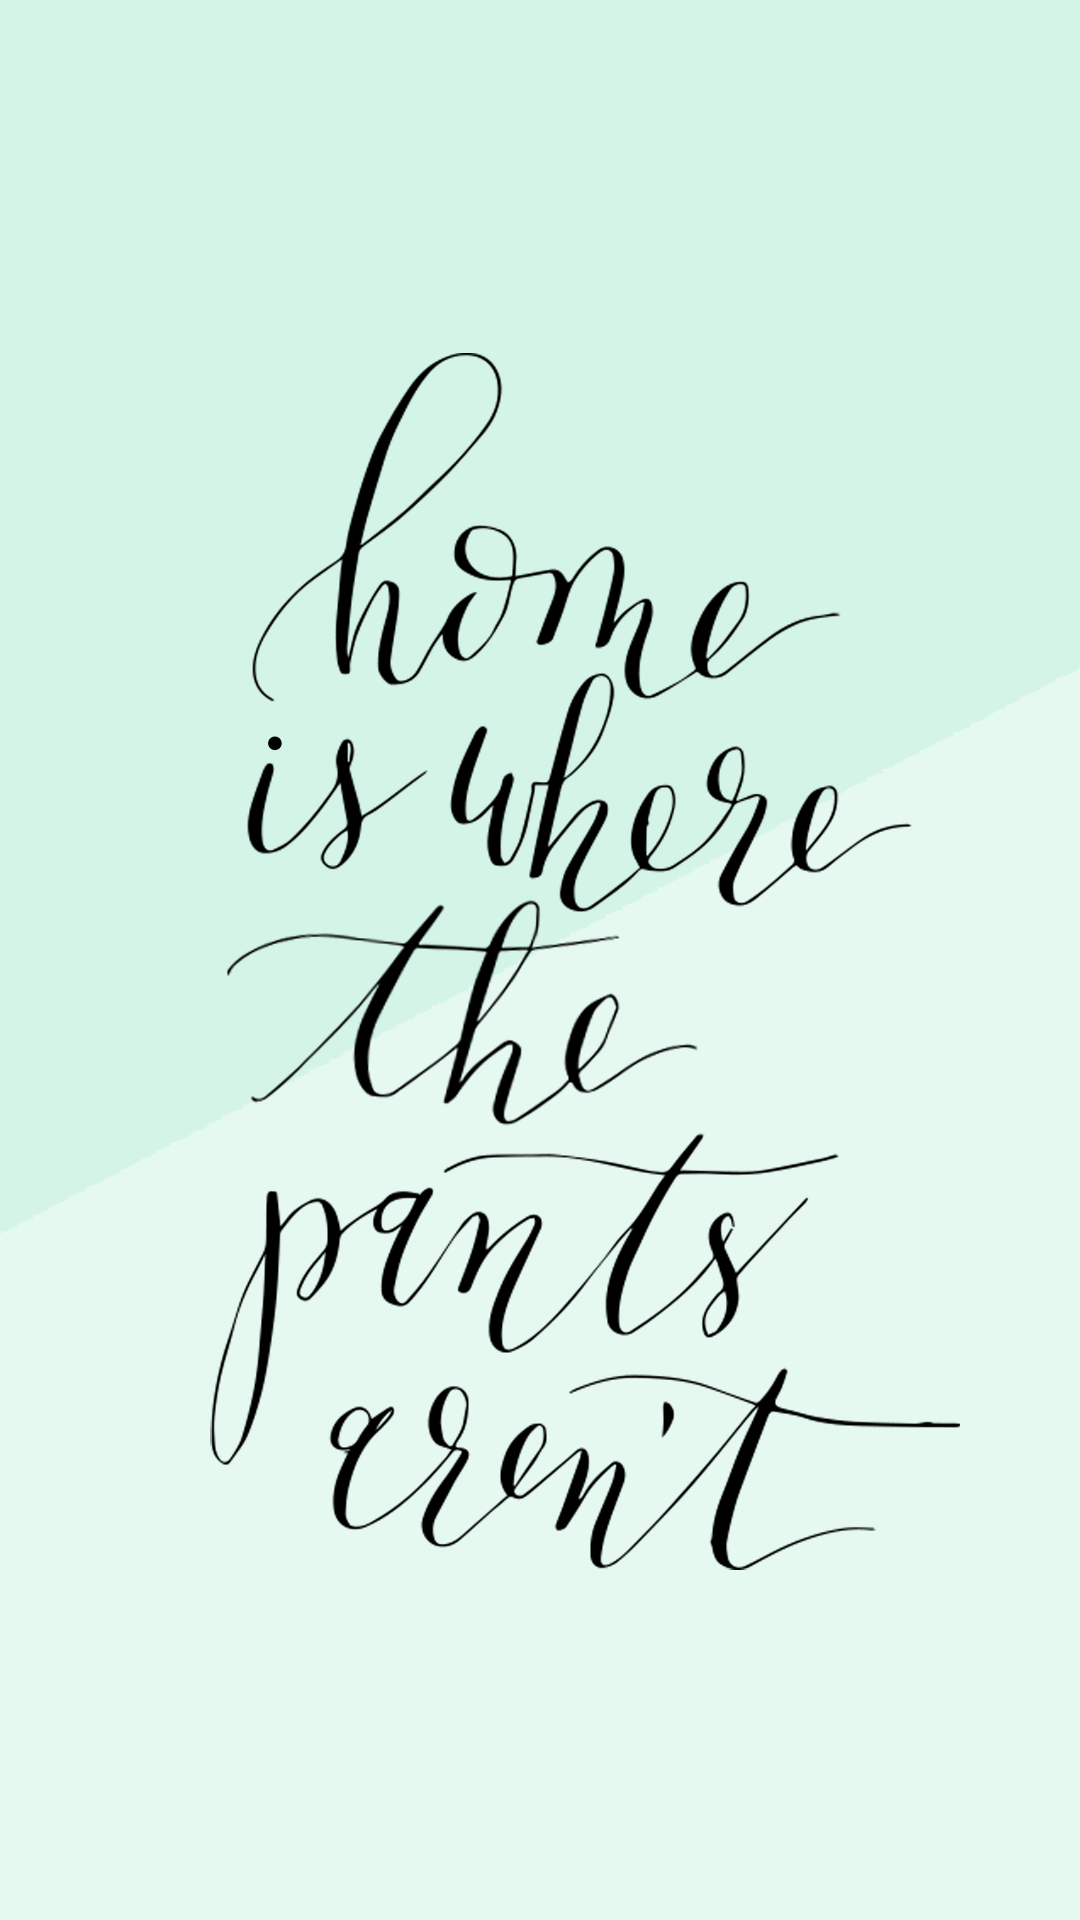 Quotes Calligraphy. QUOTES OF THE DAY